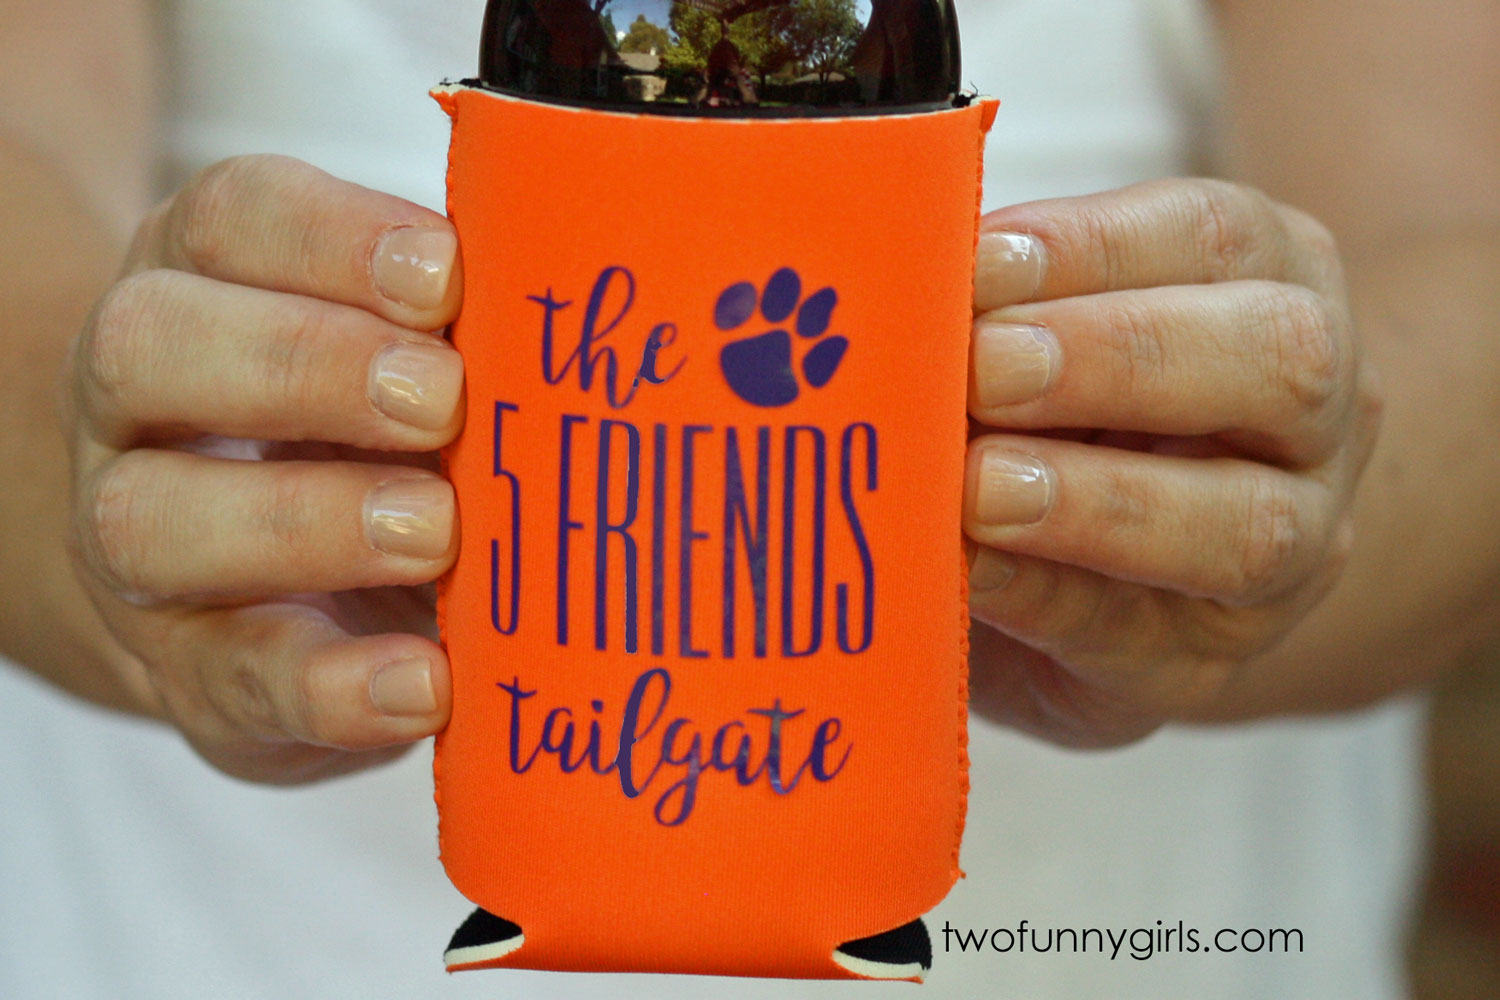 https://www.twofunnygirls.com/wp-content/uploads/2020/05/Clemson-Tigers-Personalized-Can-Koozie-Coozie-Orange-Can-Hugger-Football-Tailgate-Beer-Can-Bottle-2.jpg